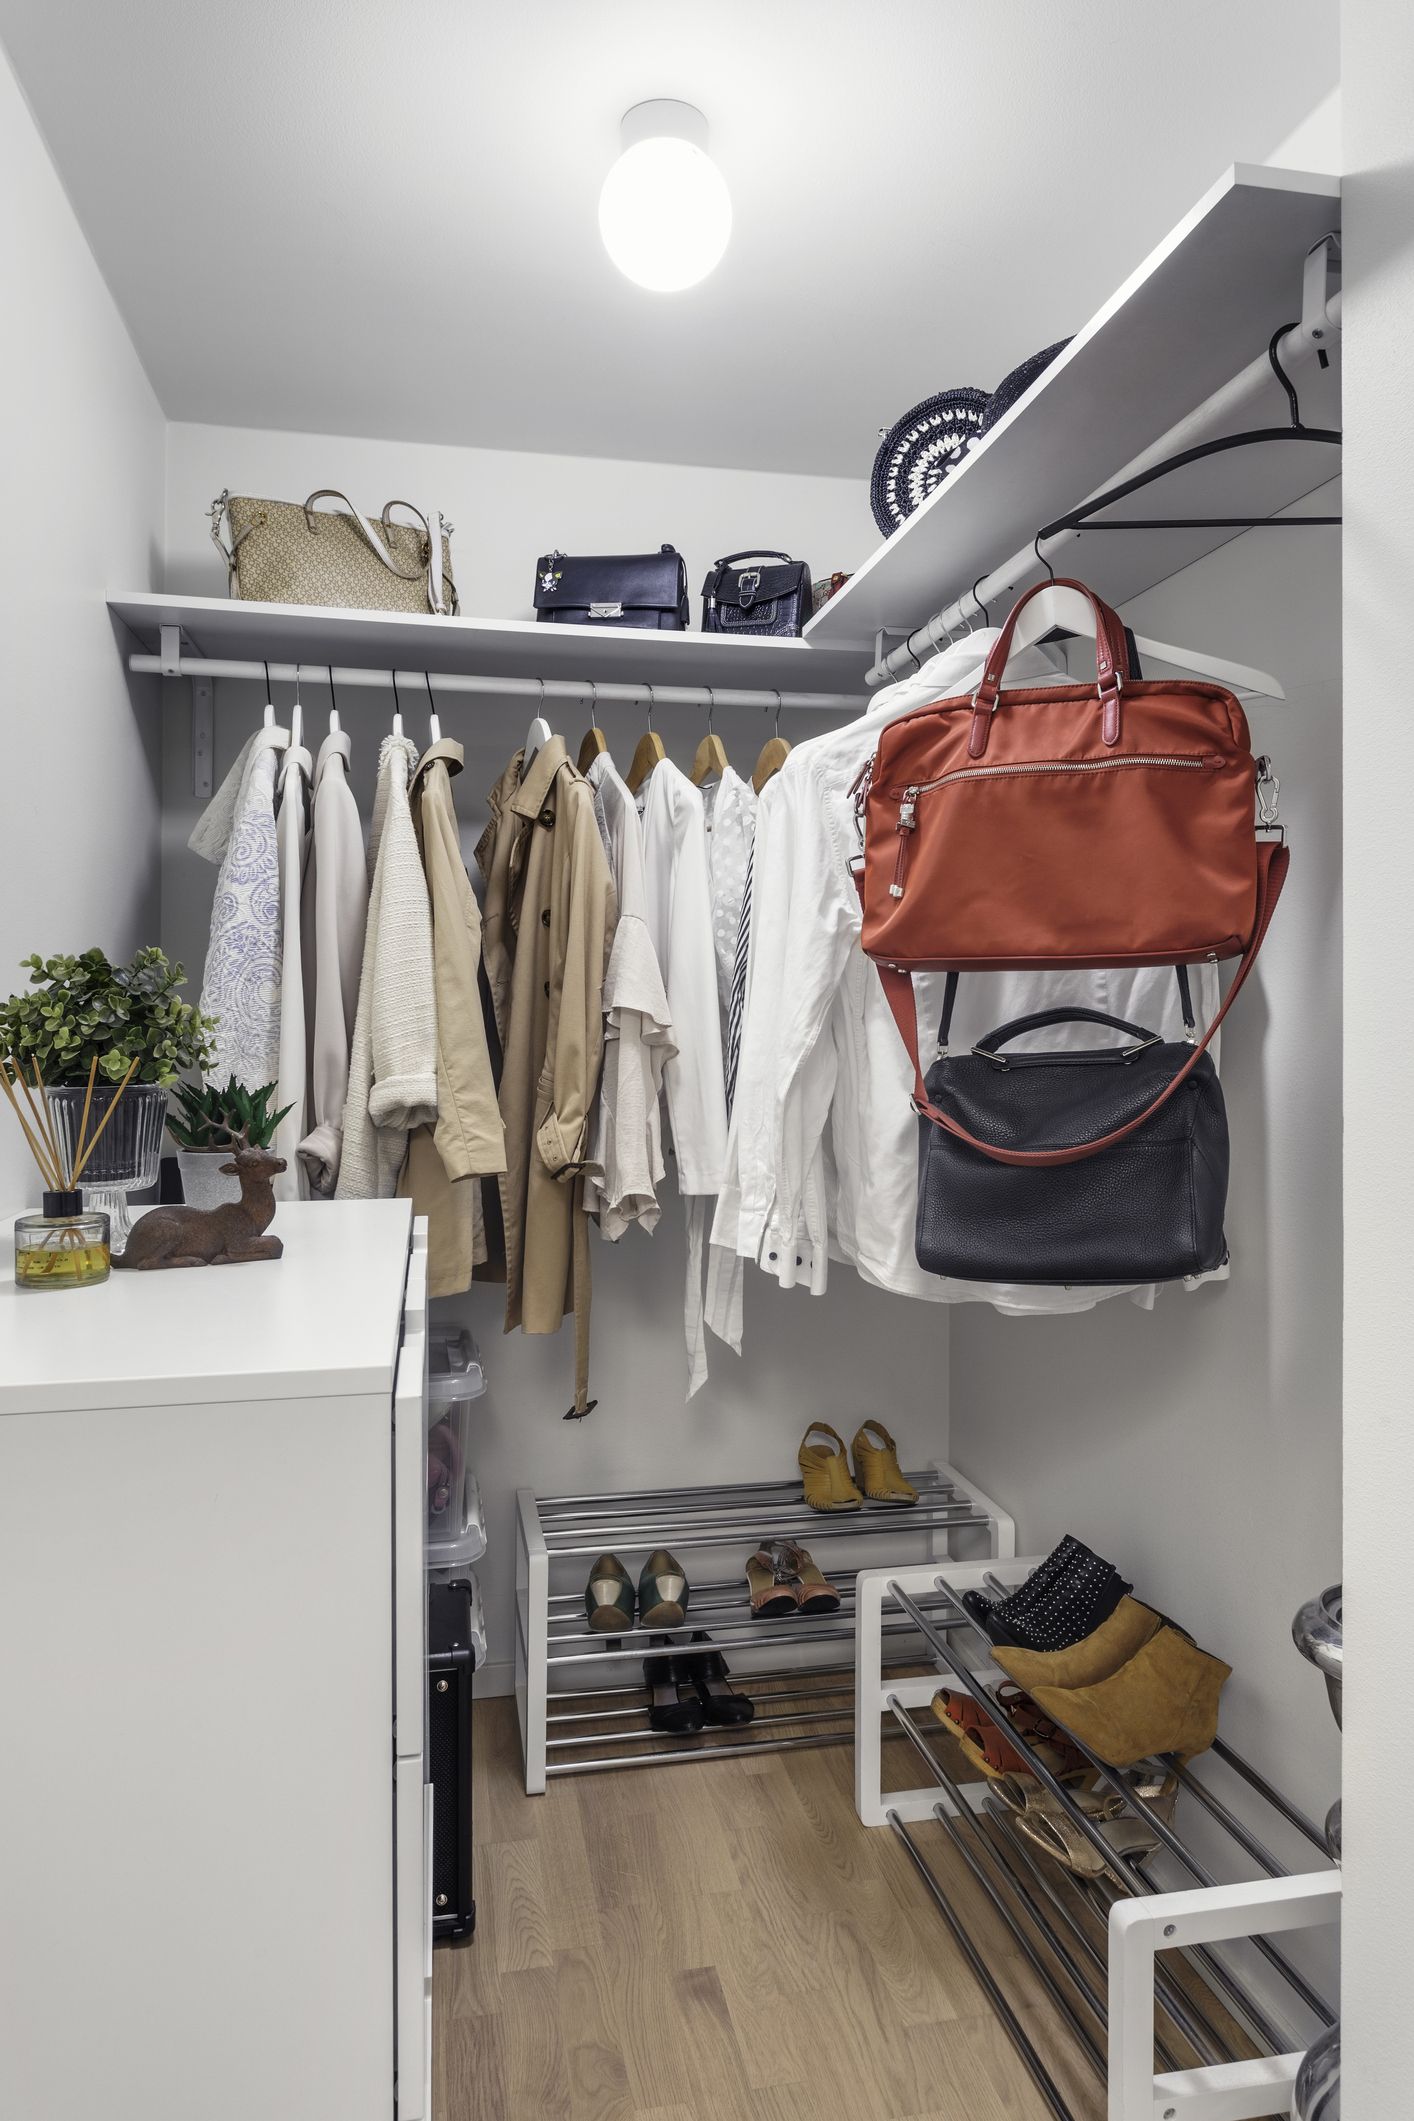 19 Creative Ways to Store Purses and Handbags | Apartment Therapy